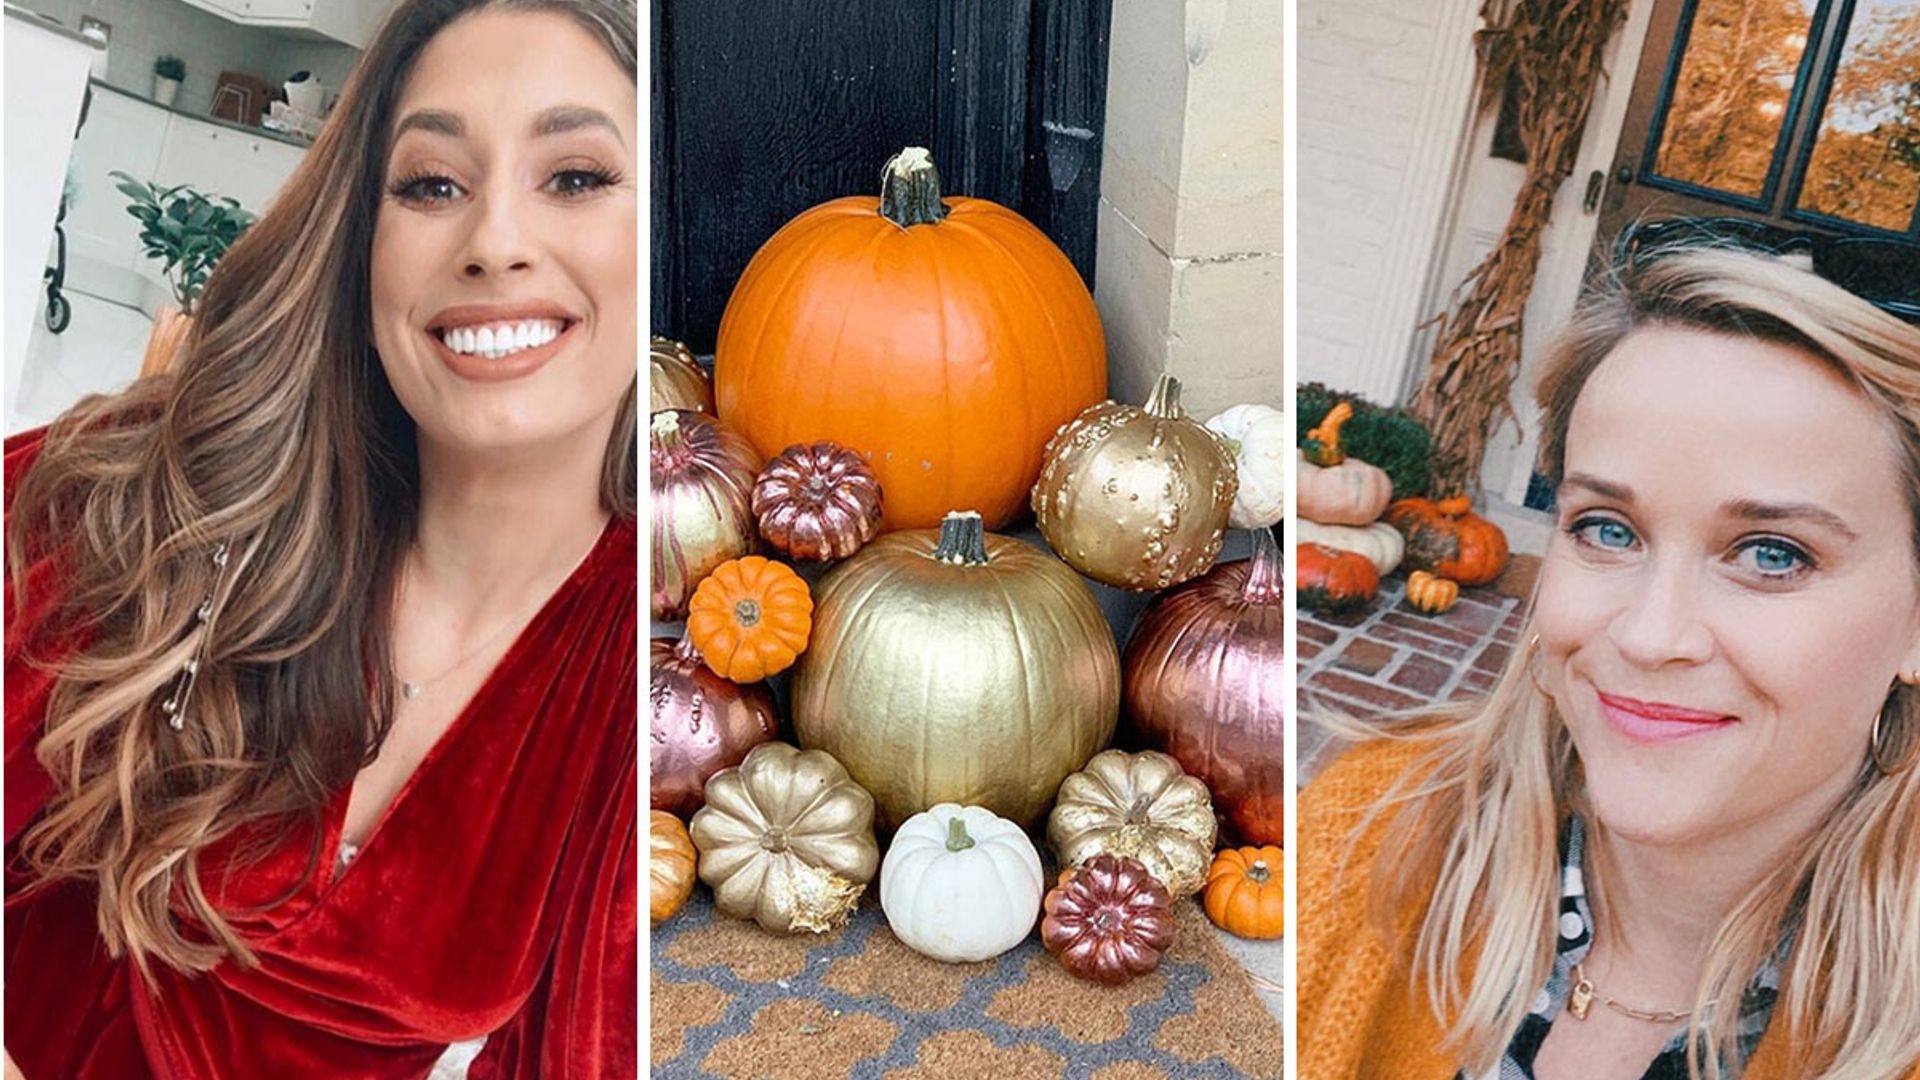 The best celebrity Halloween decor and crafts from Stacey Solomon to Reese Witherspoon